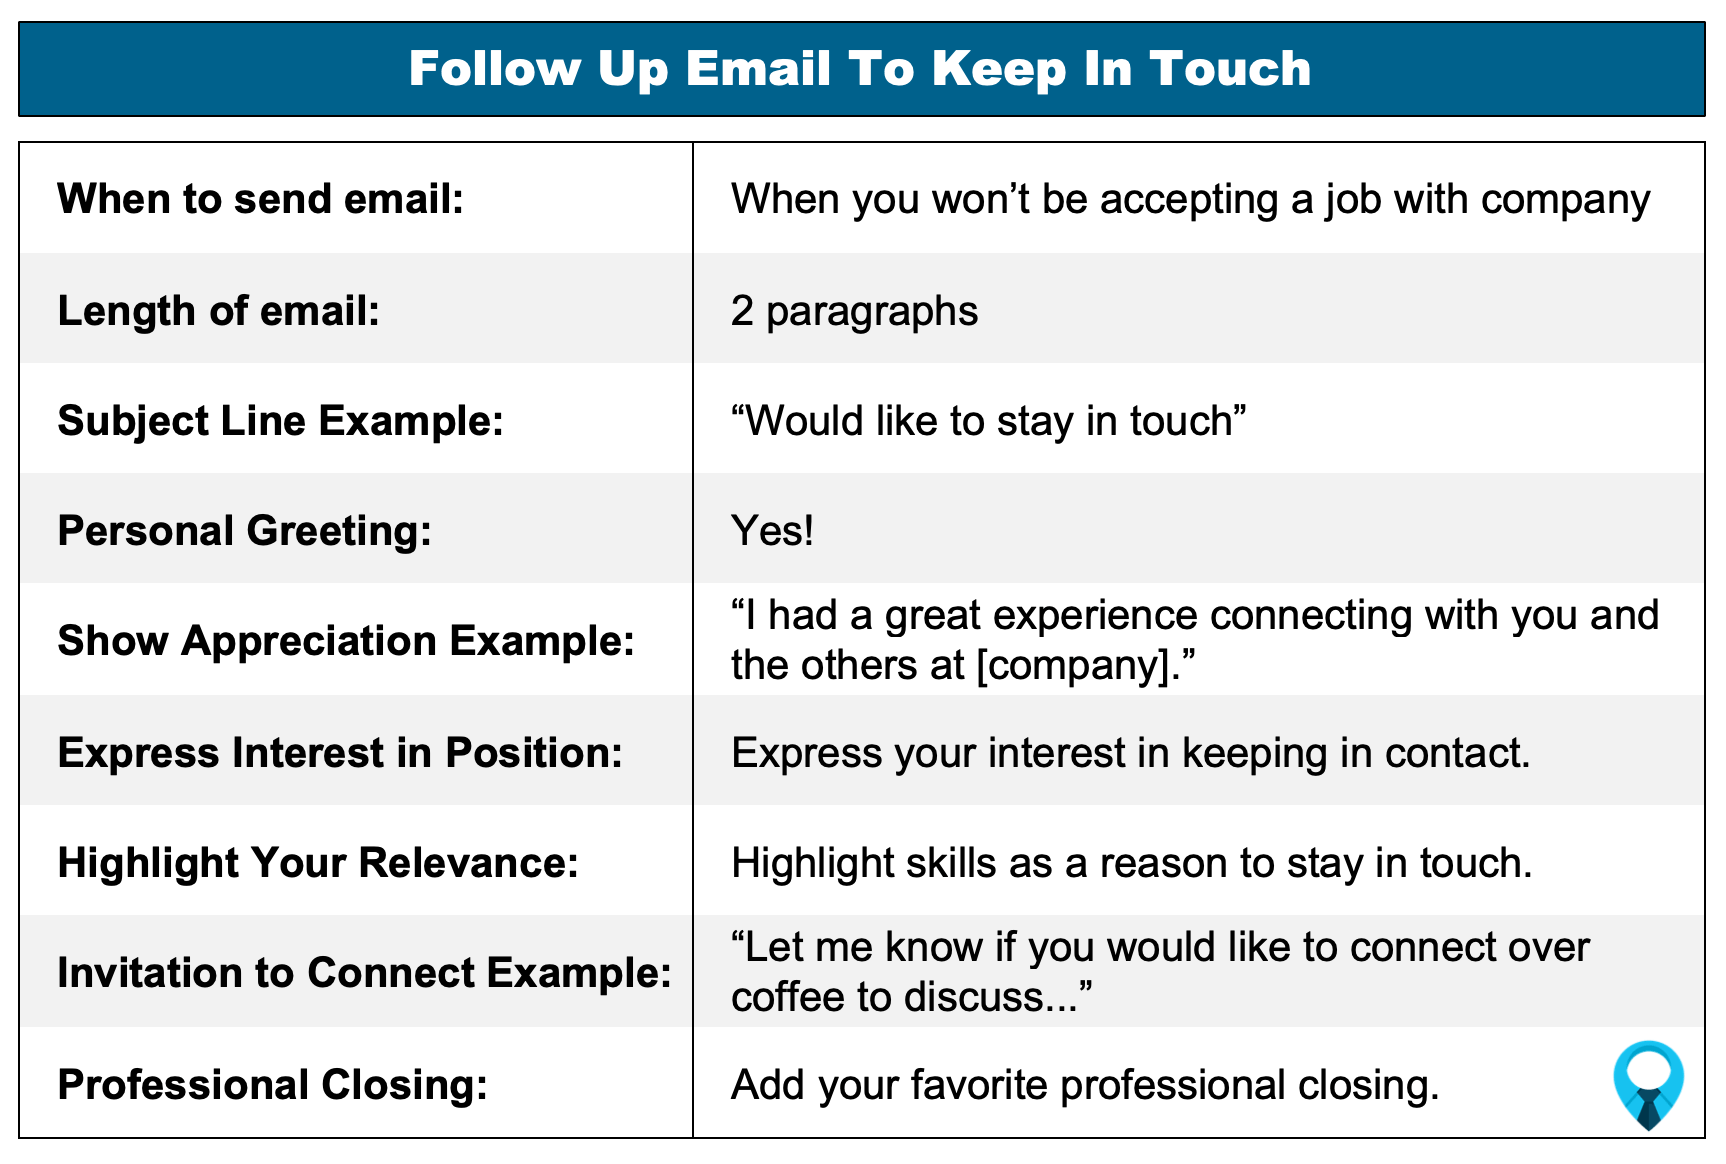 Follow-Up Email To Keep In Touch